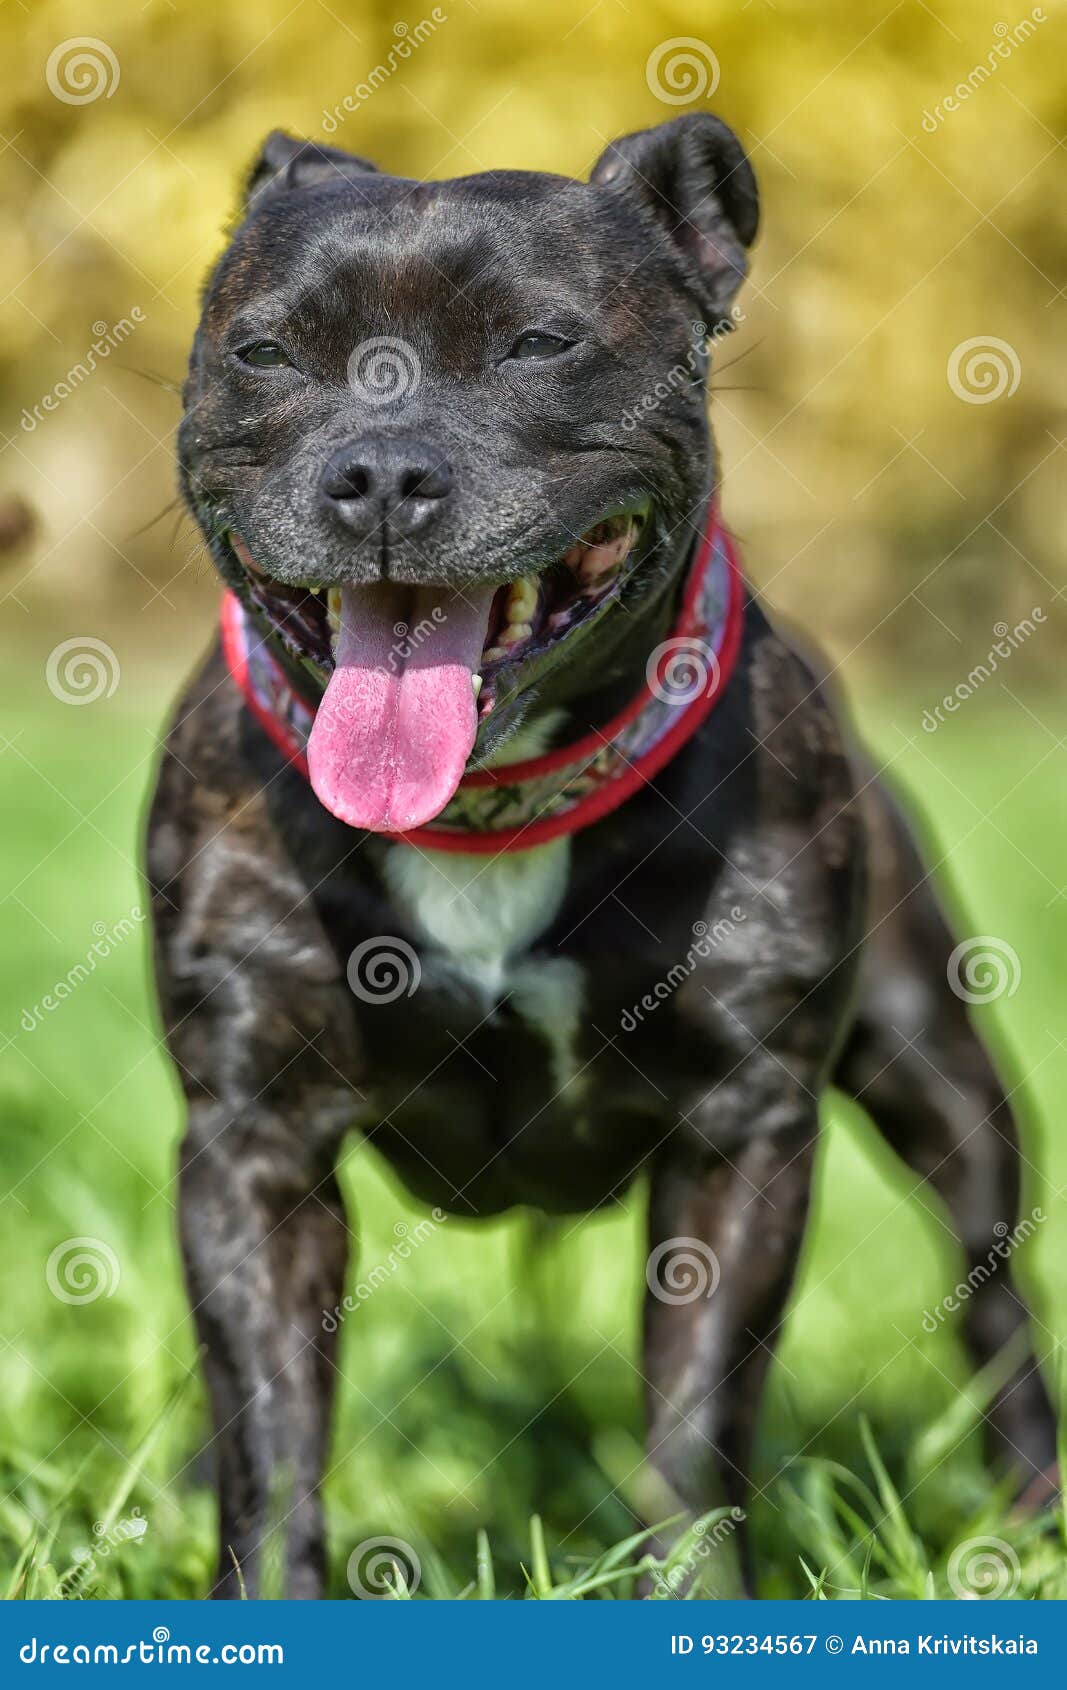 English Staffordshire Bull Terrier Stock Image Image of